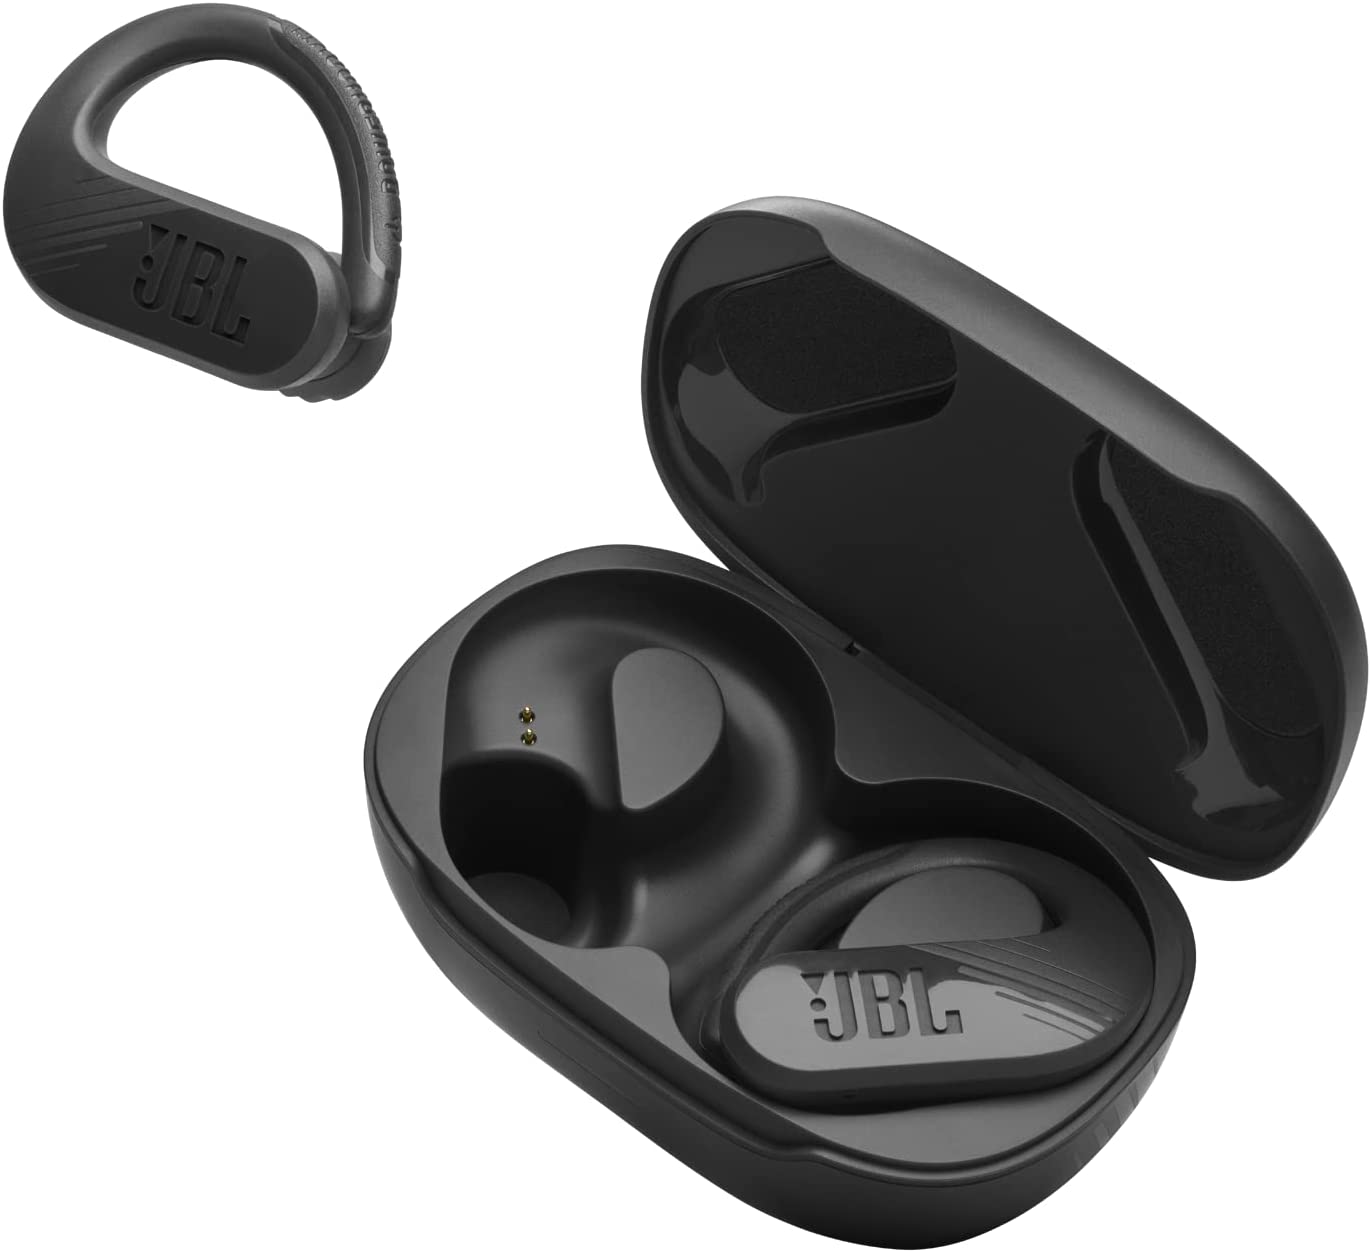 connecting-jbl-wireless-earbuds-to-your-phone